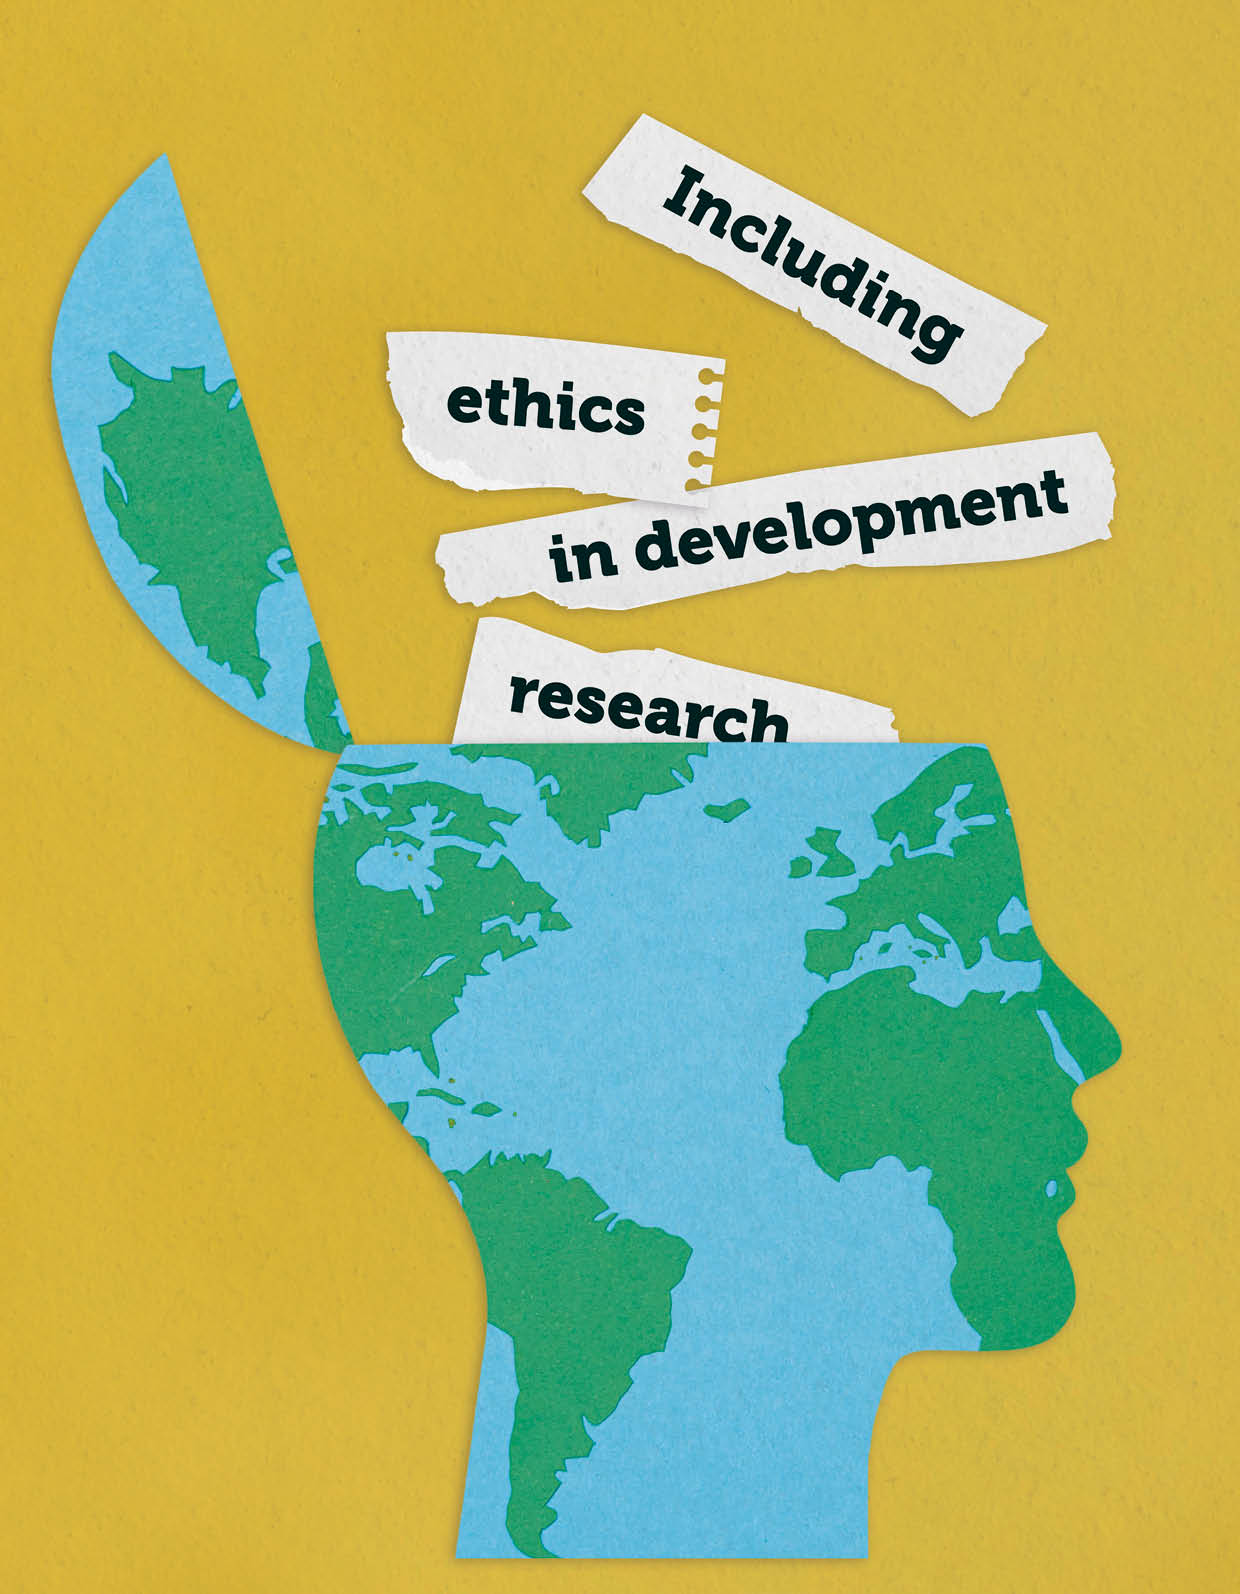 DevISSues Vol. 25 No. 1 - Including ethics in development research